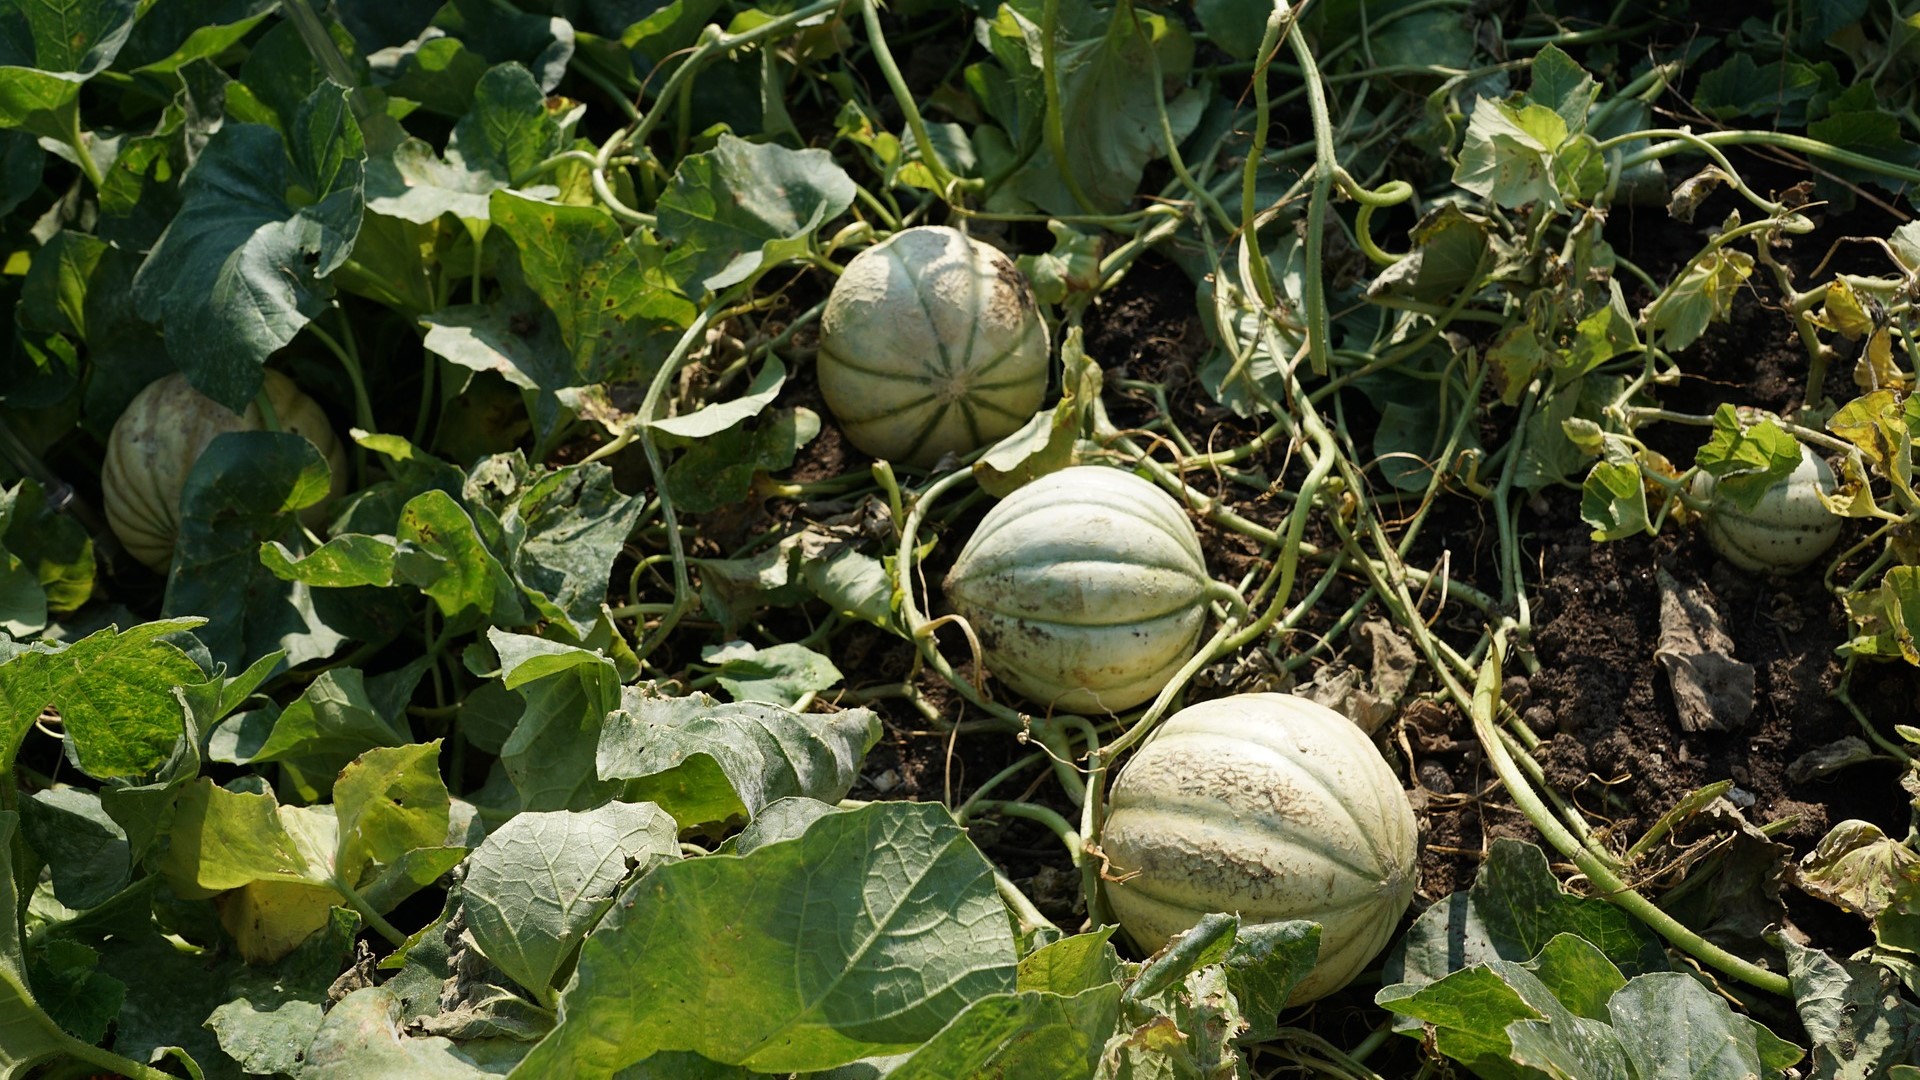 Melons growing in the field.